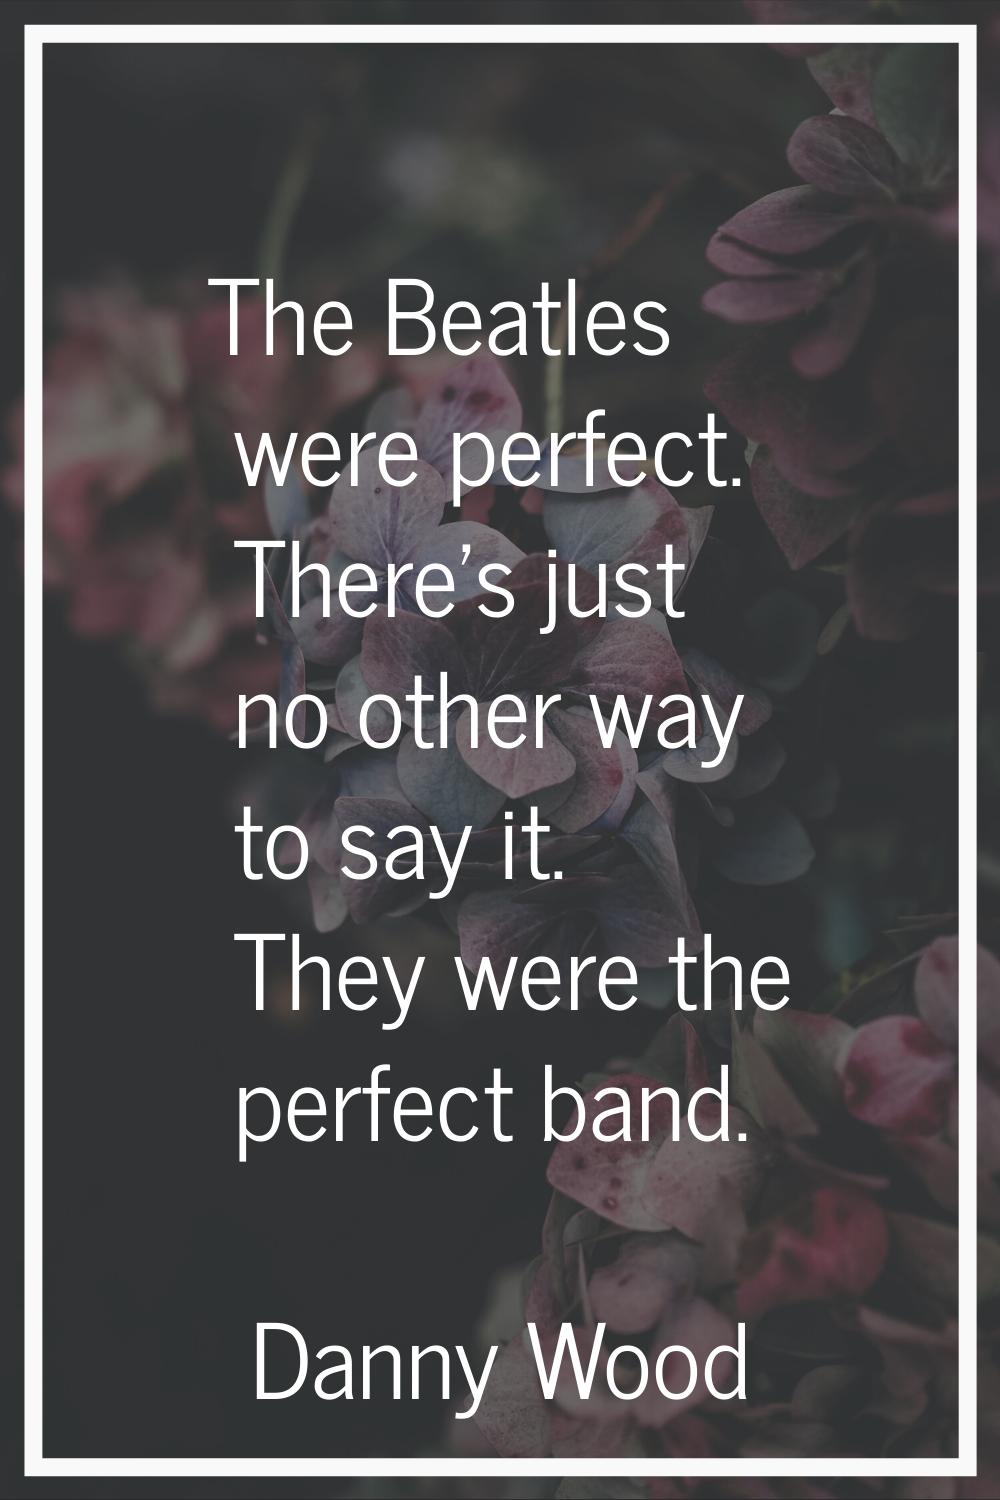 The Beatles were perfect. There's just no other way to say it. They were the perfect band.